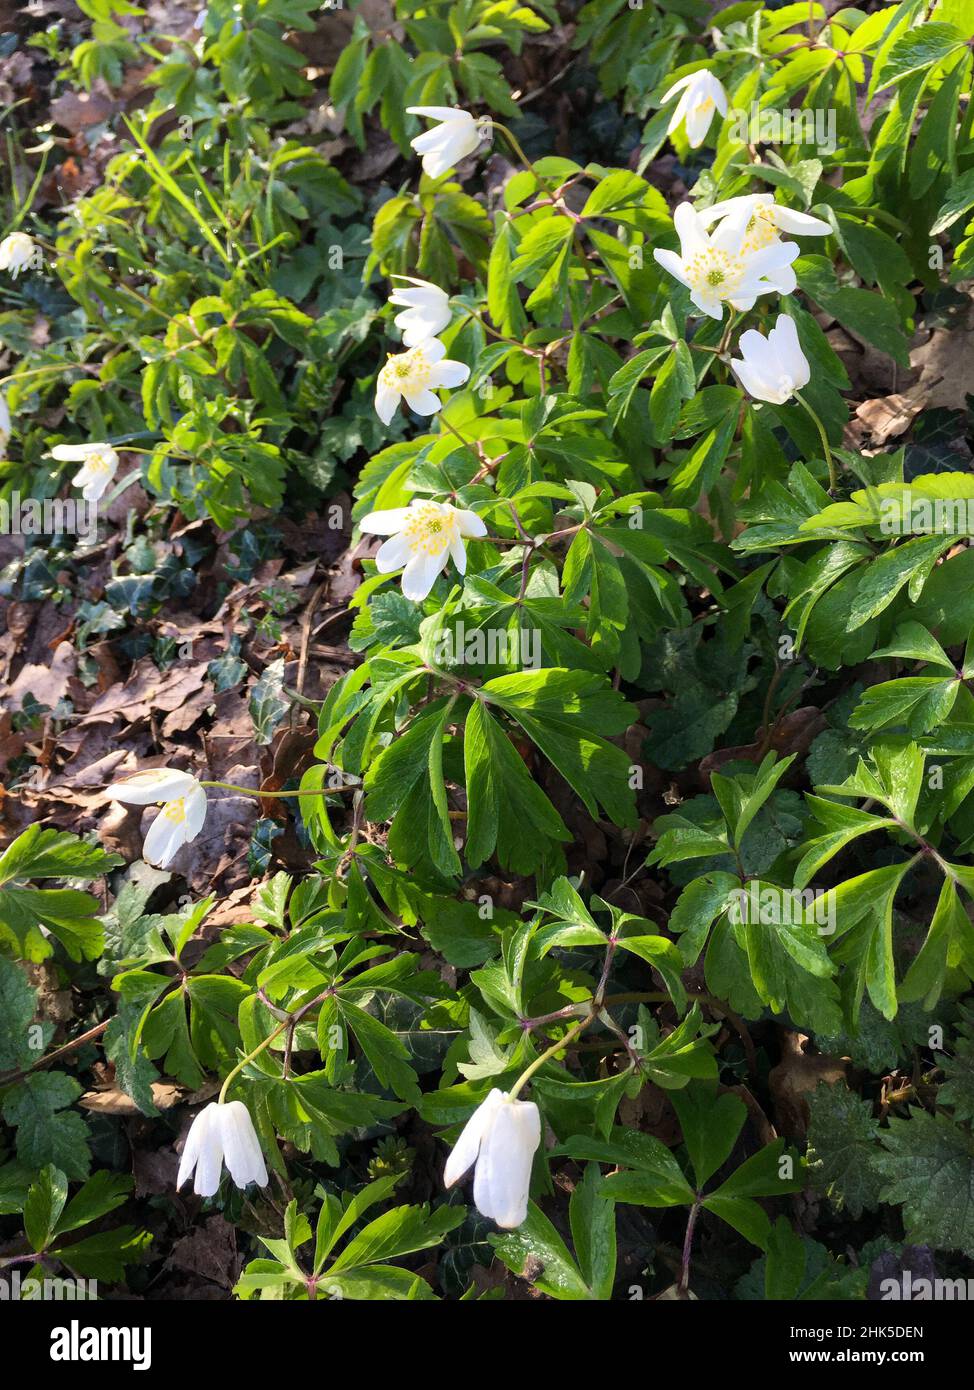 Wood anemones growing in dappled shade on the woodland floor in spring with young, stinging nettles and young ivy leaves. Stock Photo